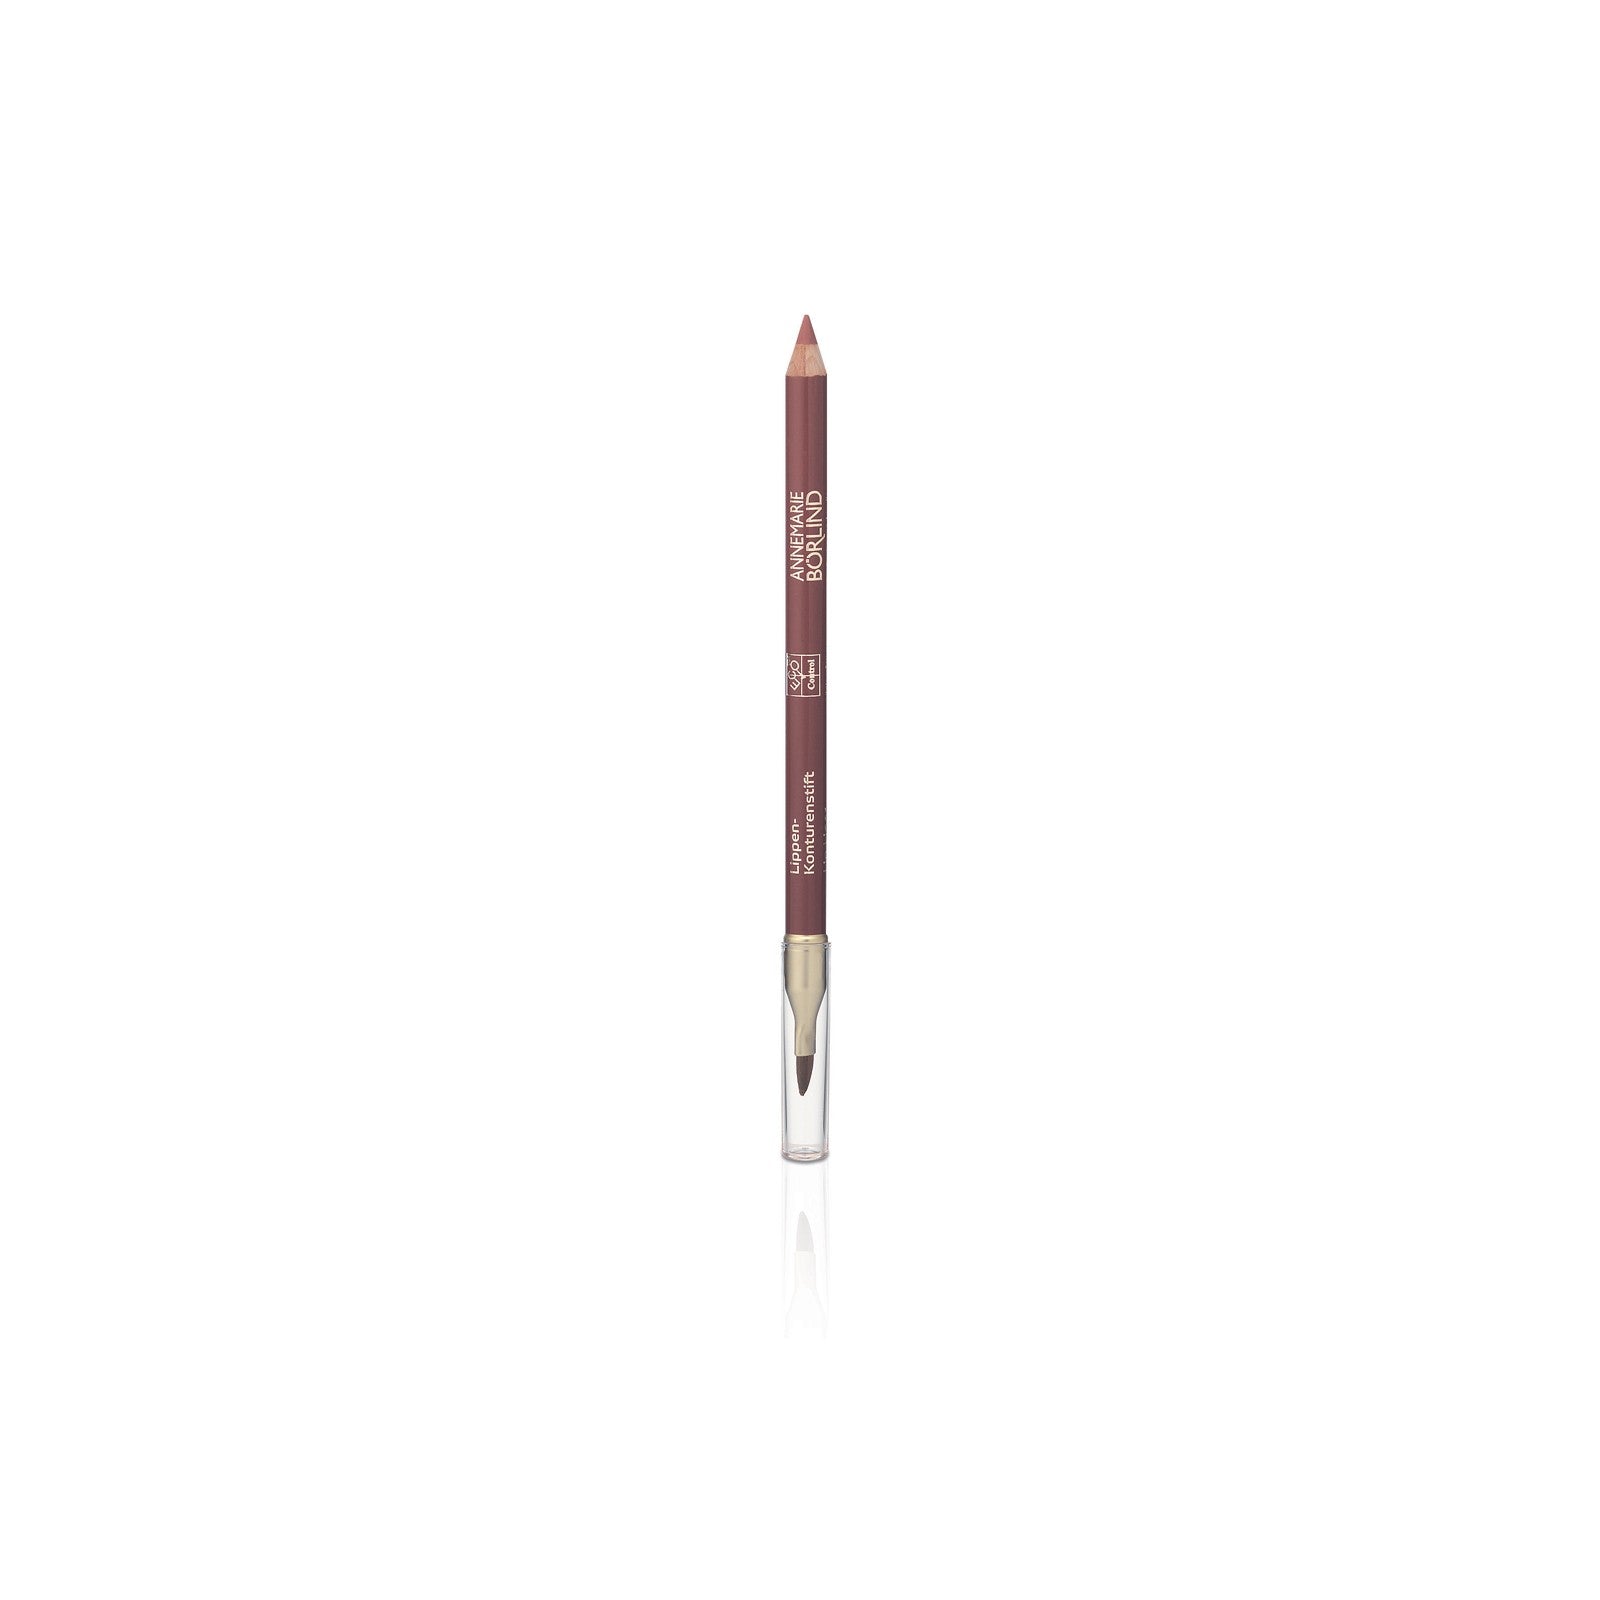 Annemarie Borlind Lip Liner Nude 1.08g (Discontinued- Replacement Coming Soon)